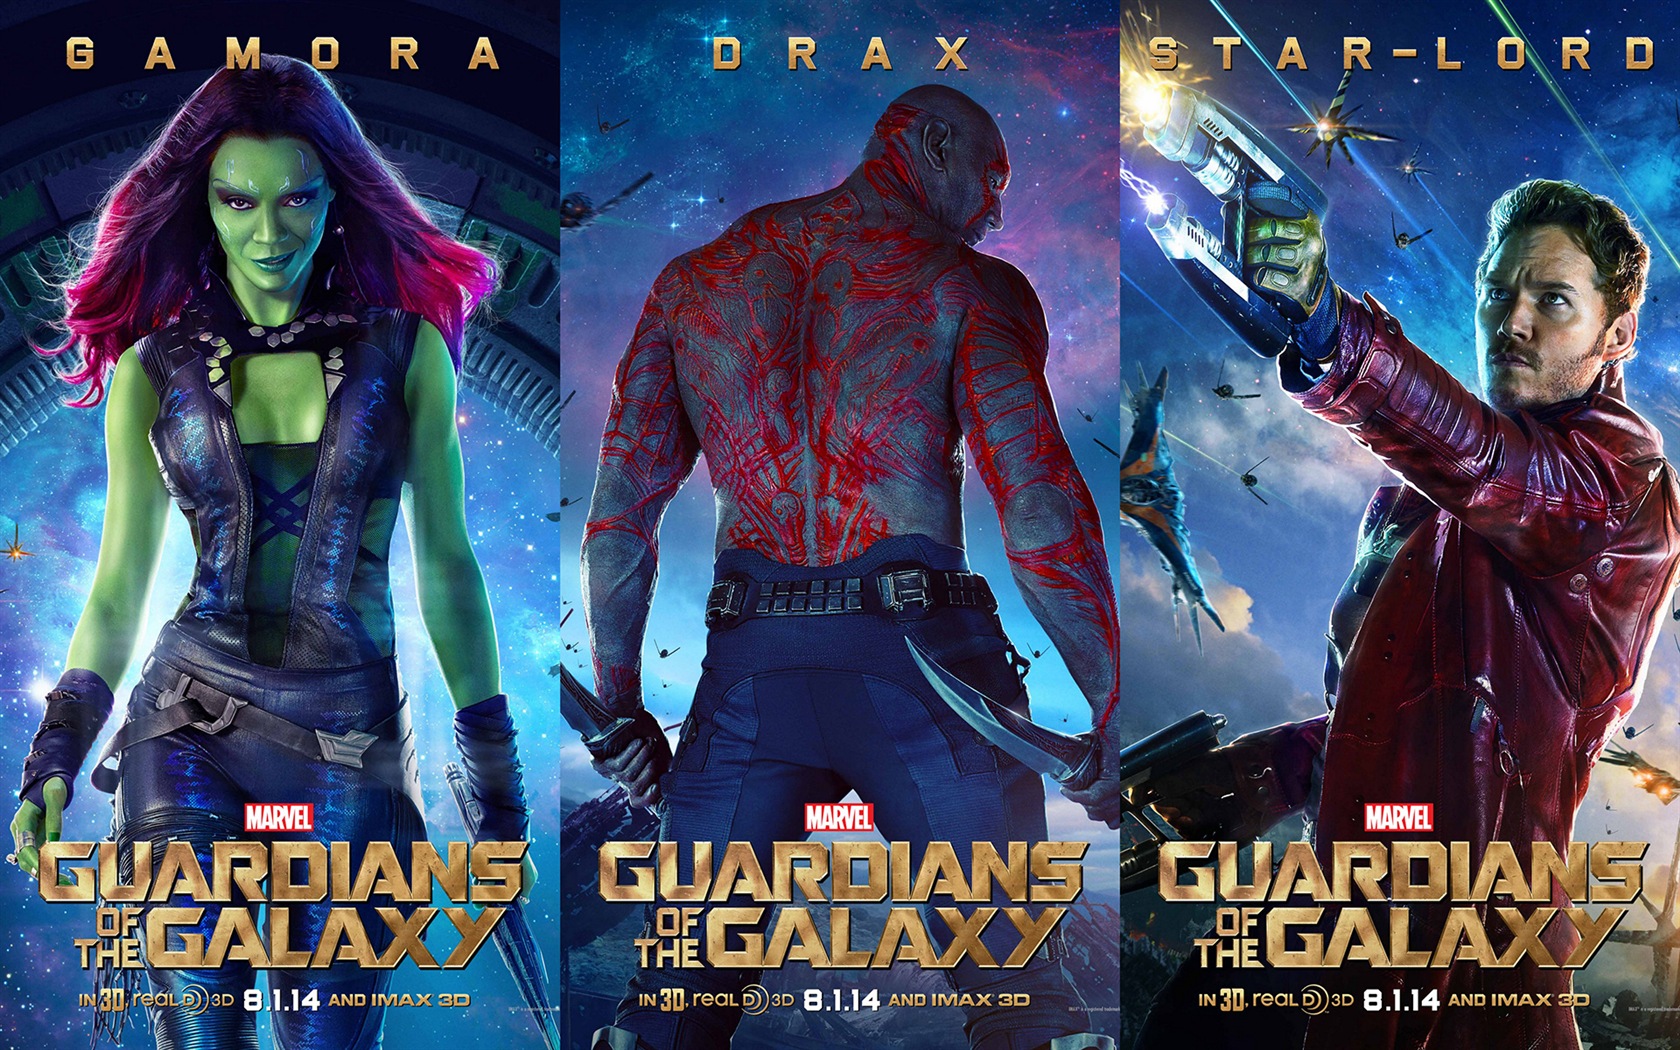 Guardians of the Galaxy 2014 HD movie wallpapers #12 - 1680x1050